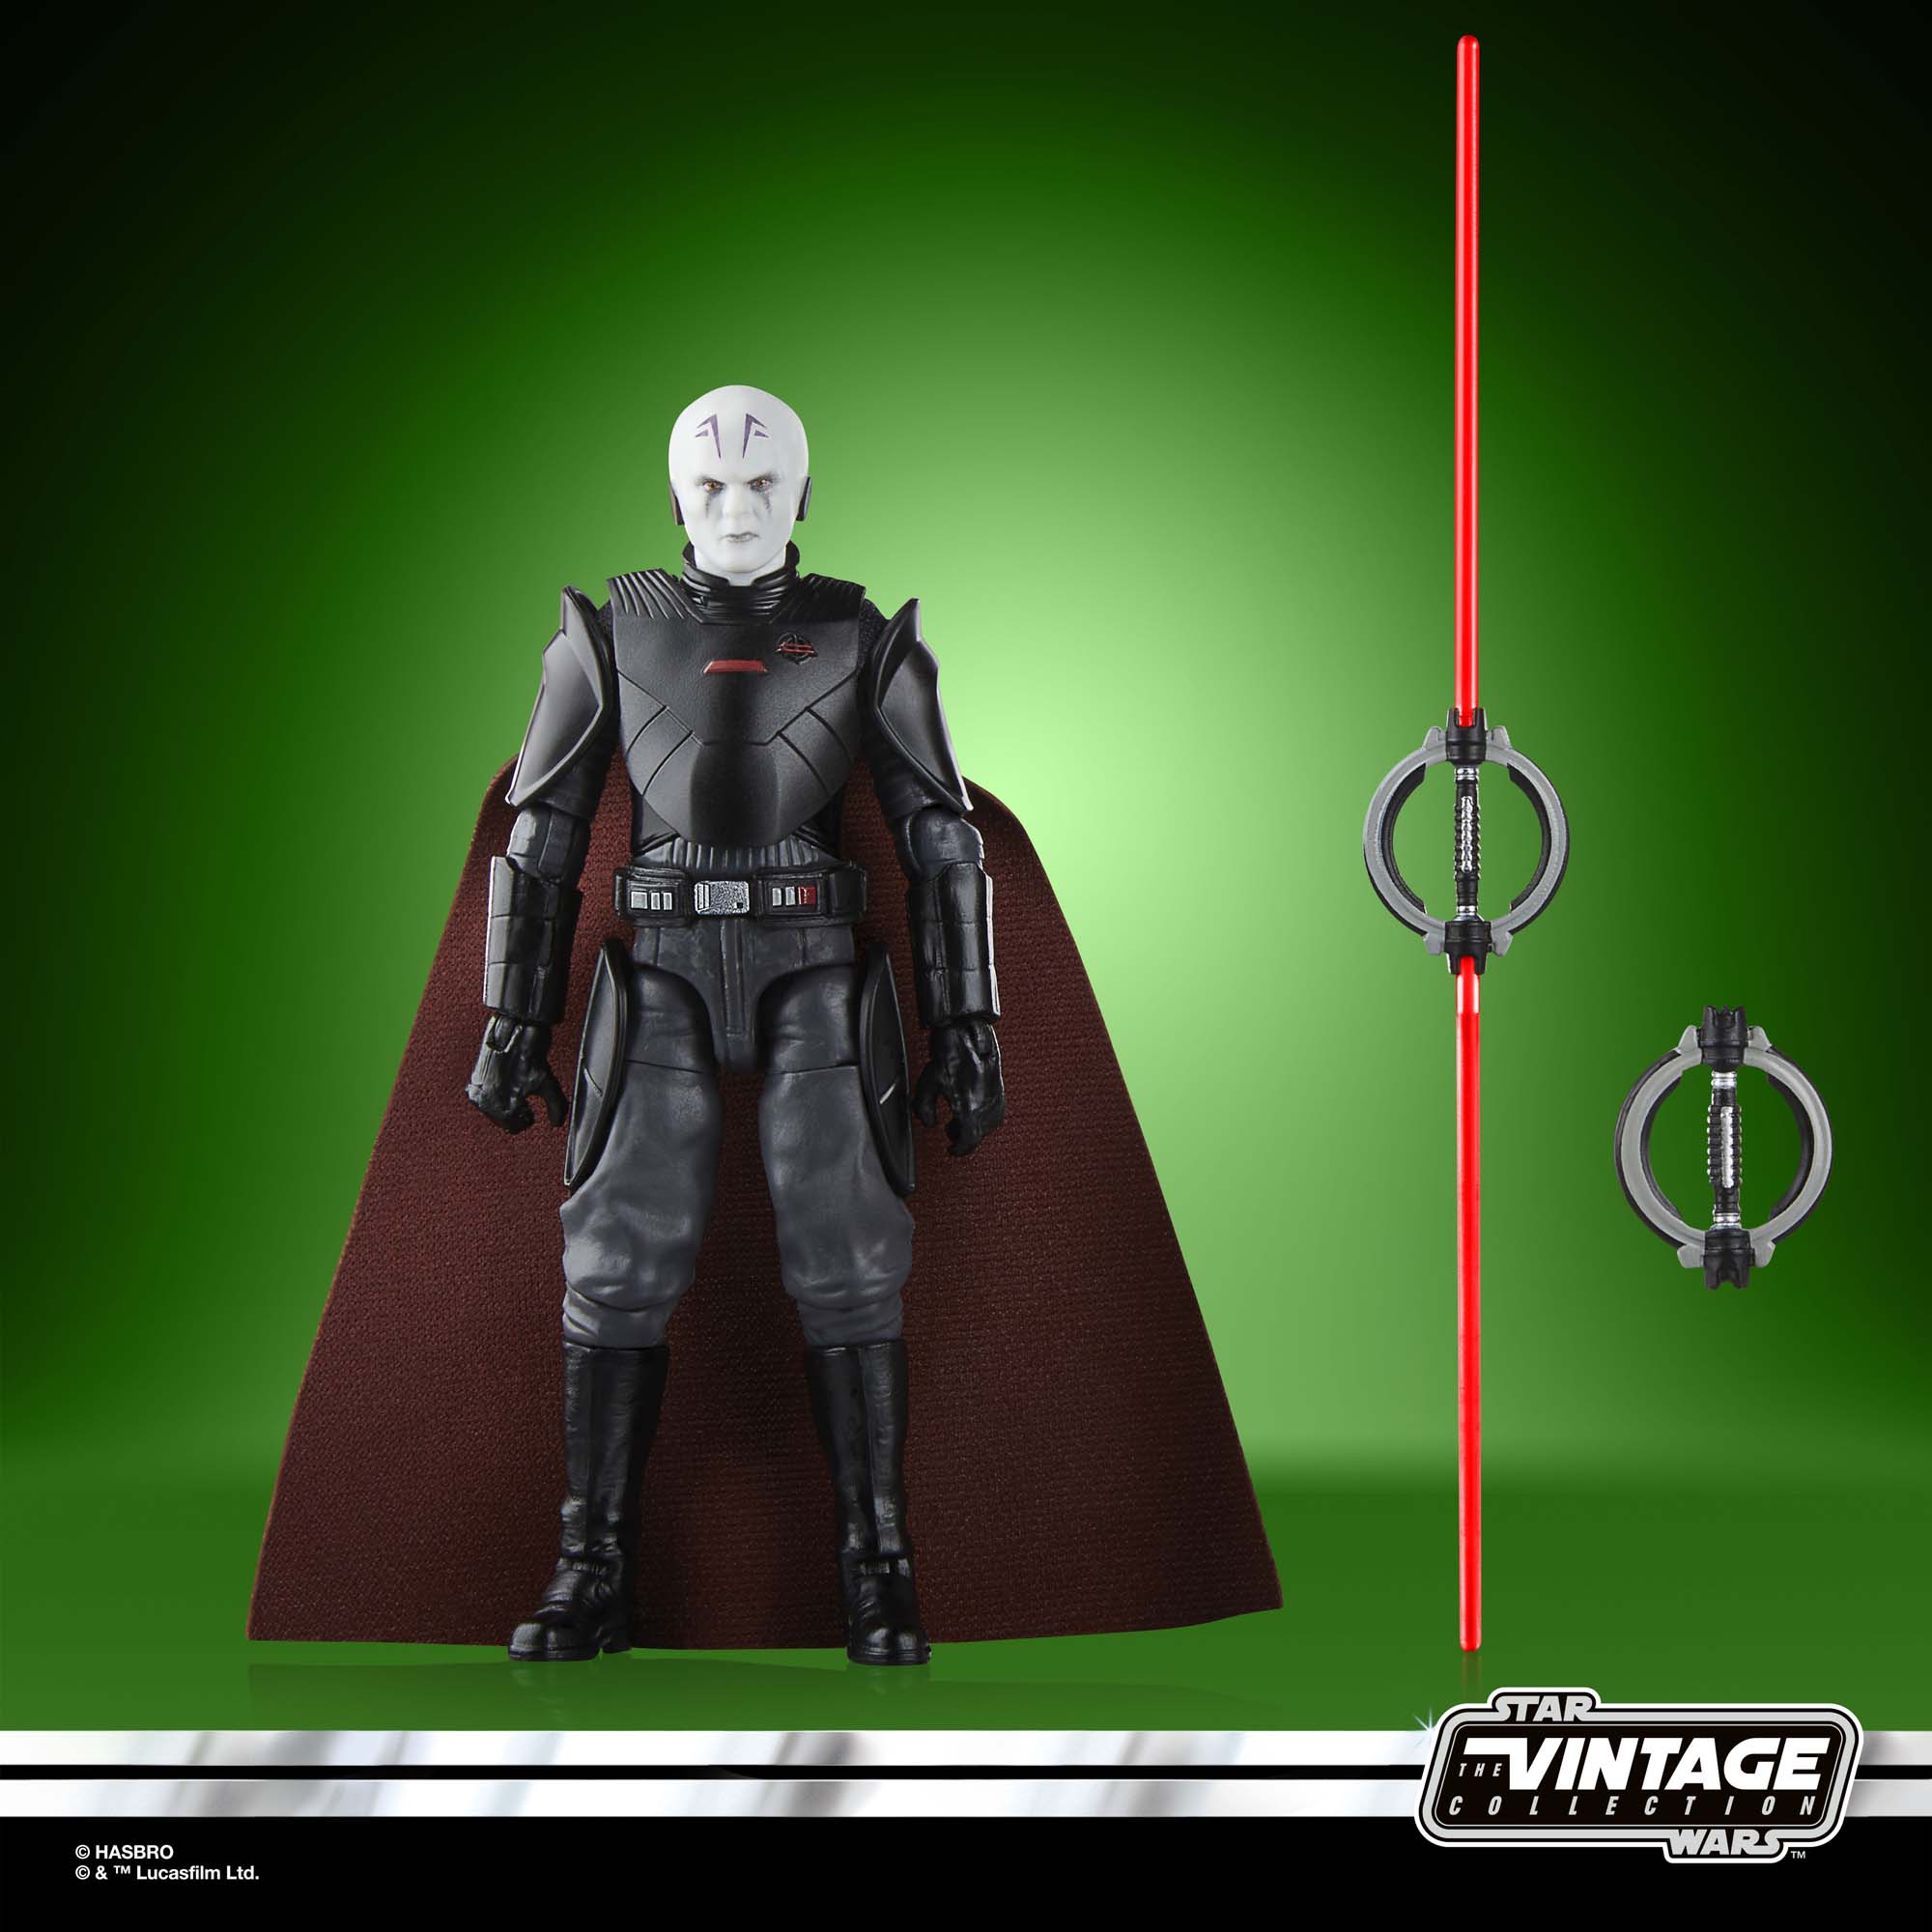 Star Wars The Vintage Collection Grand Inquisitor Action-Figur (9,5 cm) F73435X0 5010996184238